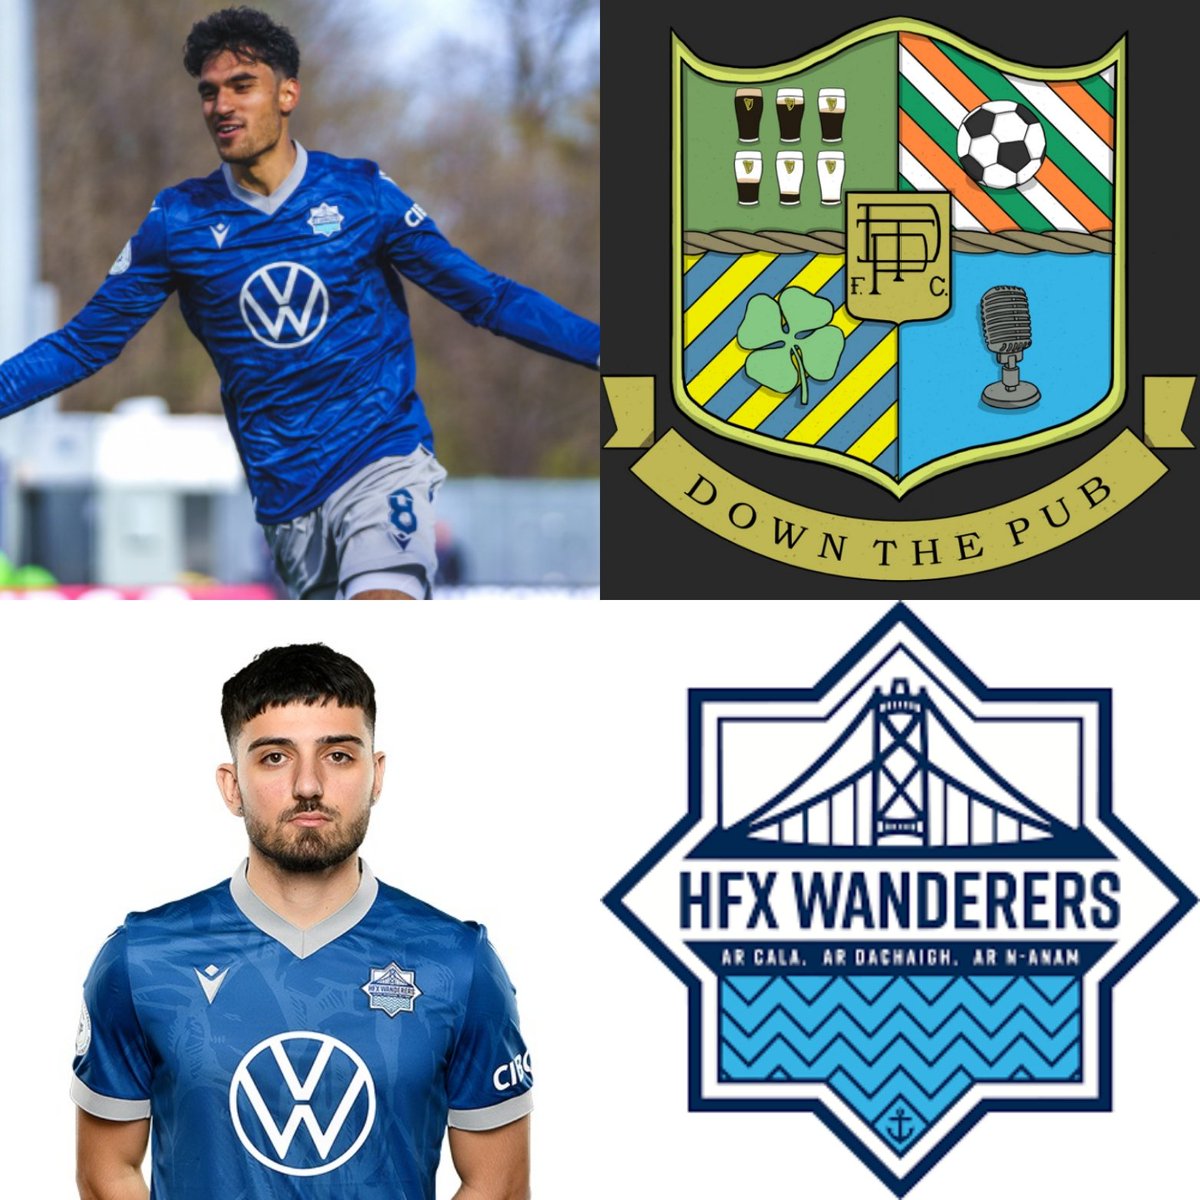 New Episode!! @FromAwaysHFX @Searl04 and Anthony look at how The Wanderers are shaping up for this season. We also give our starting 11 and season predictions too! Check it out here: tinyurl.com/37aw3ype #coyw #canpl #cpl #cansoccer #hfxwanderers